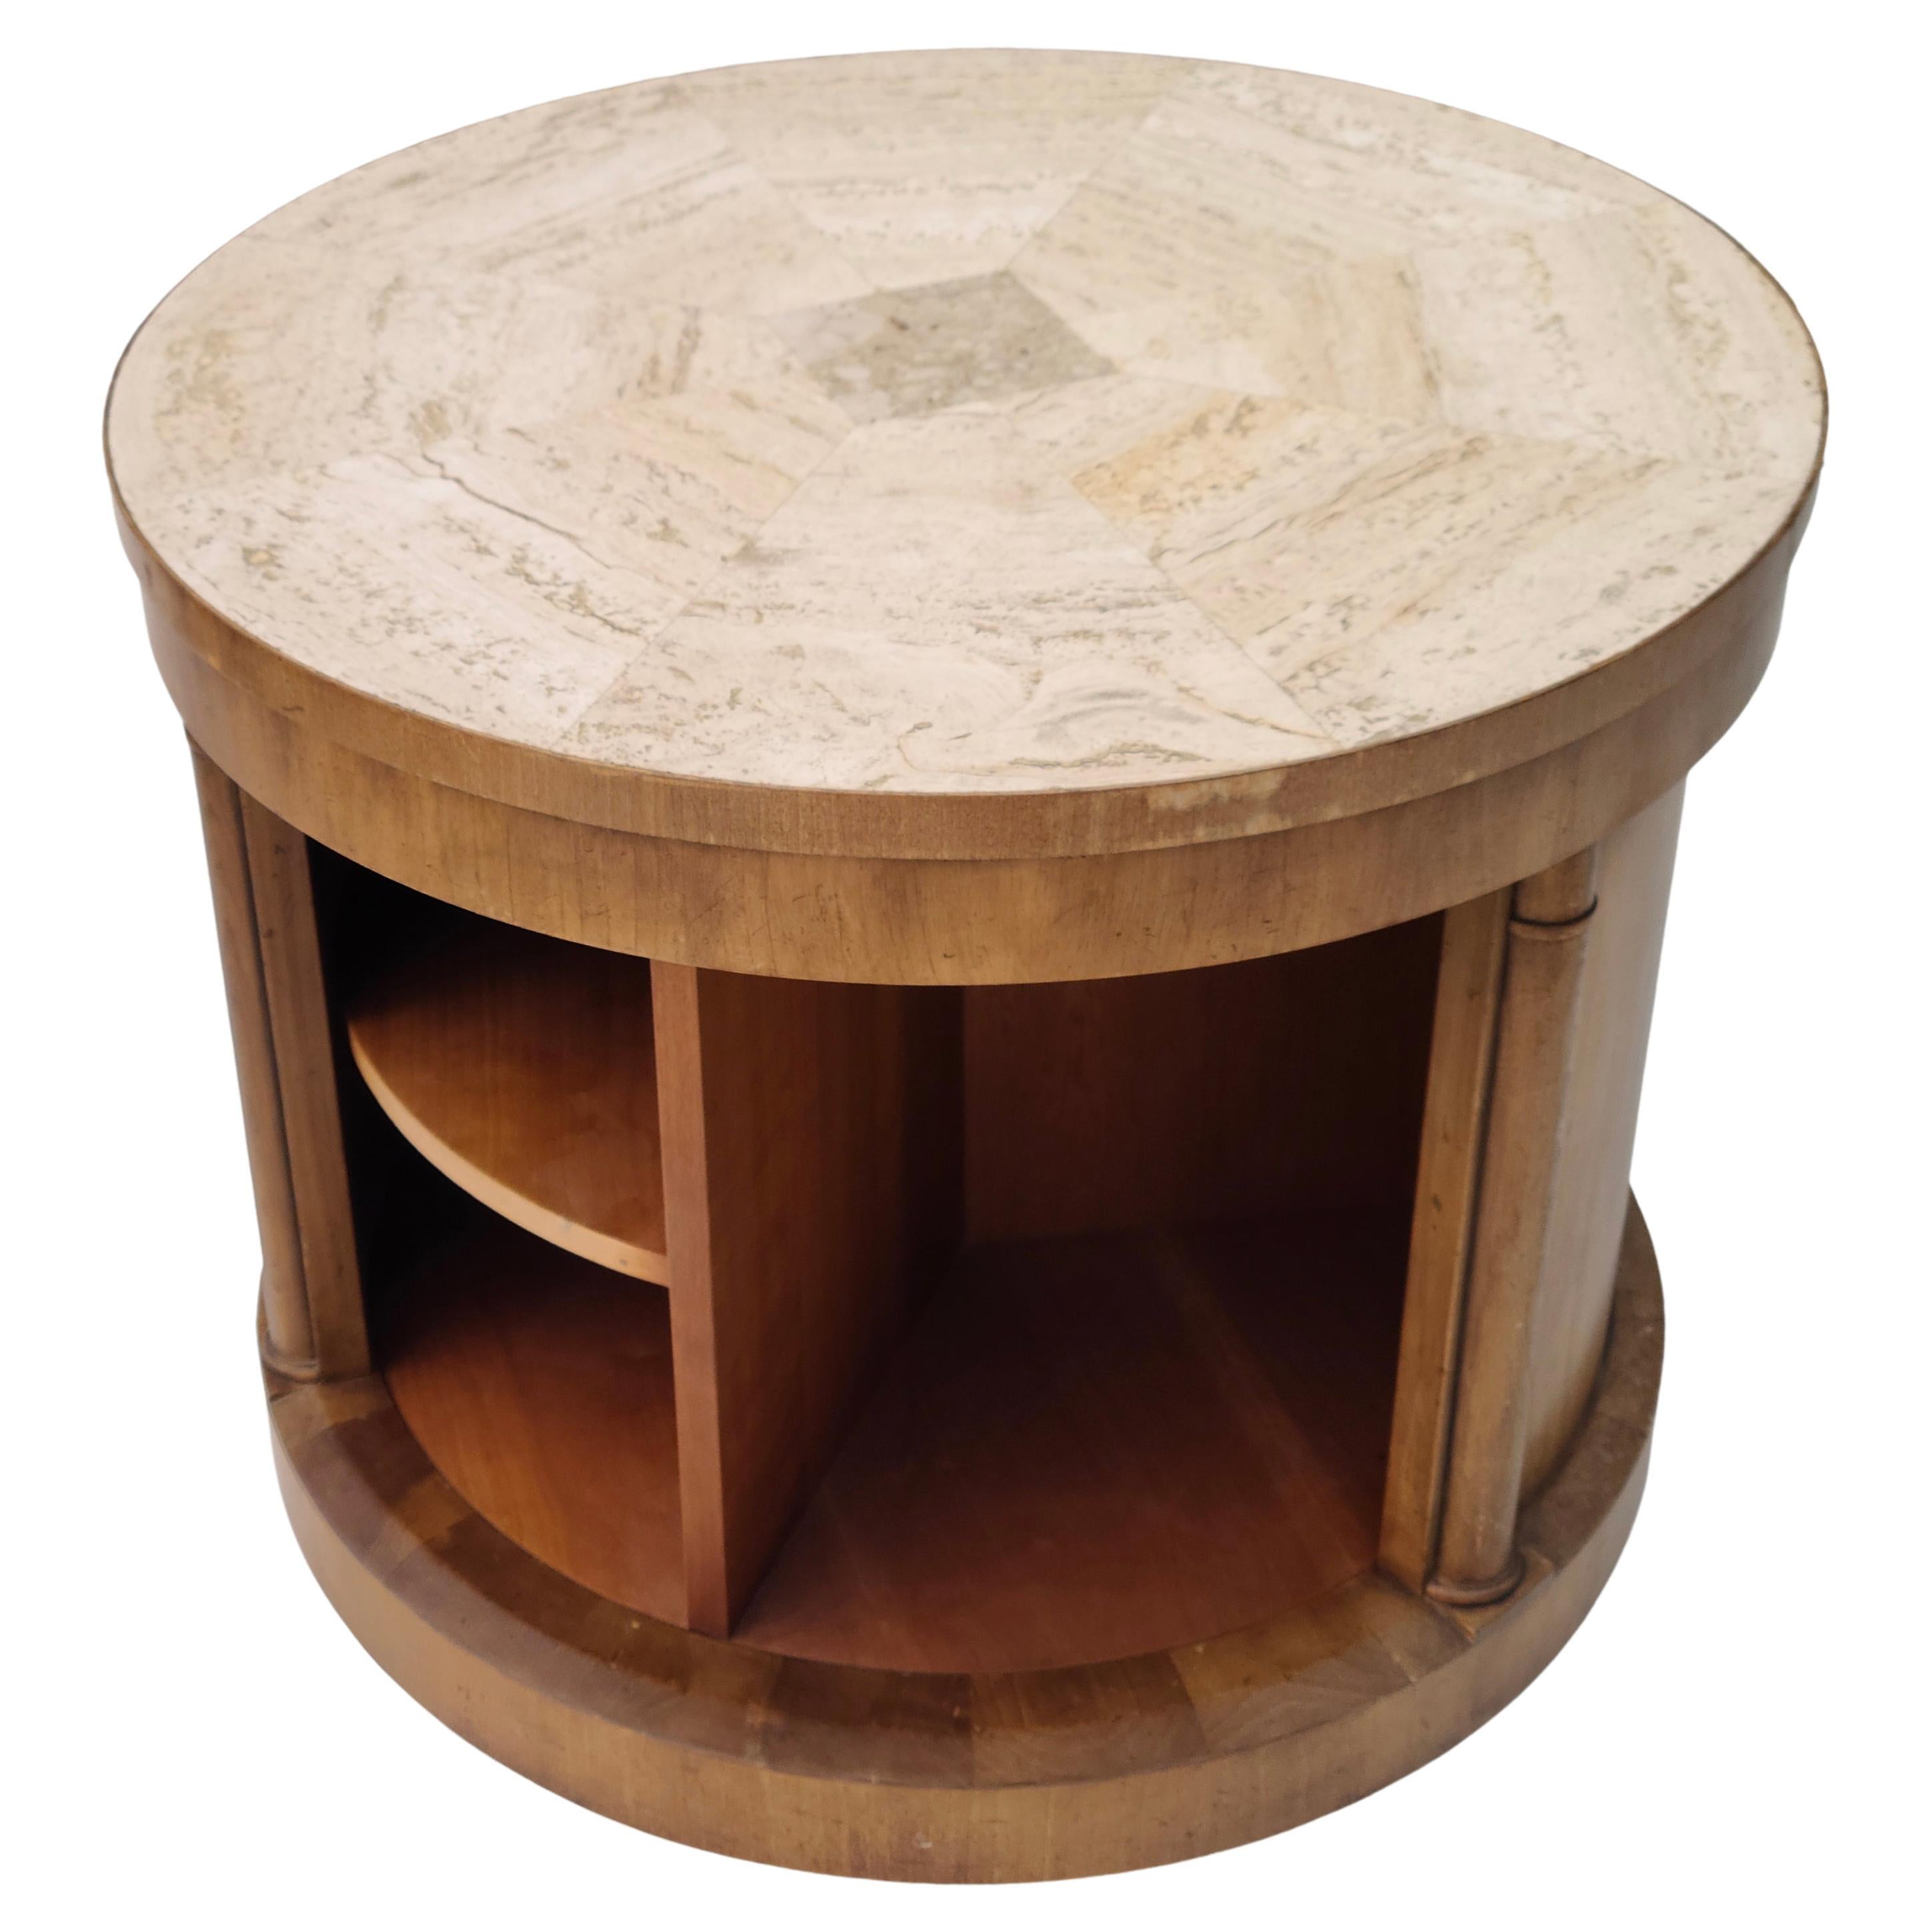 Please feel free to message for accurate shipping to your location.

Cylinder side table by Baker. Mosaic Travertine Top. Walnut surround. Lazy
Susan rotary interior system in Cherry. Nice for discrete contents. Unrestored.